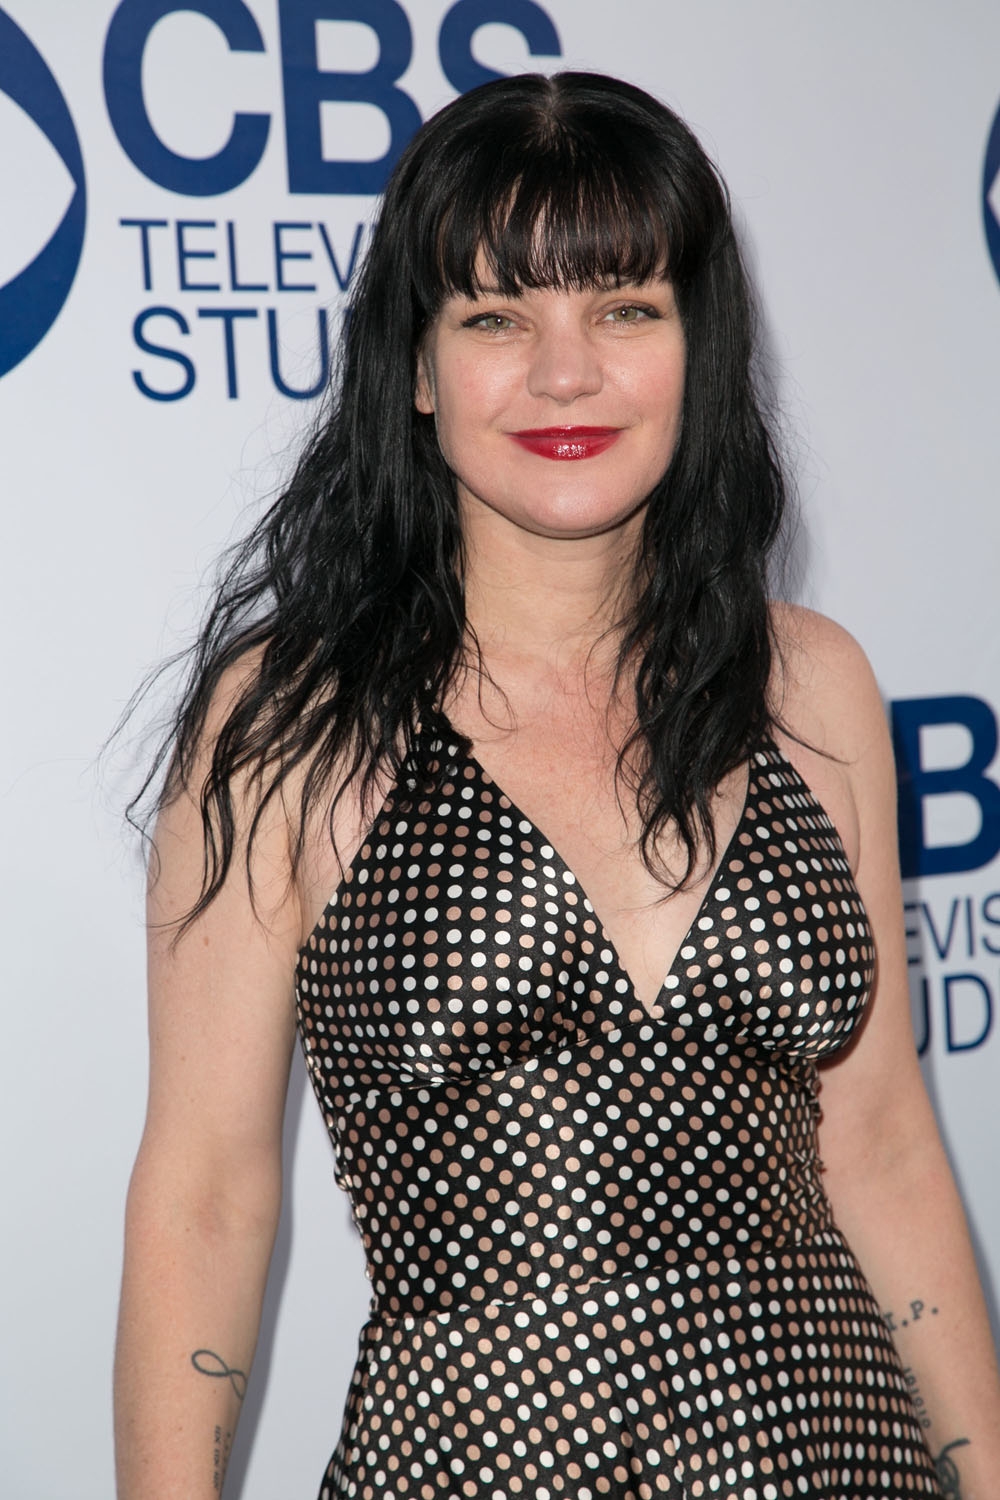 Cele bitchy Pauley Perrette had a horrible reaction to her r